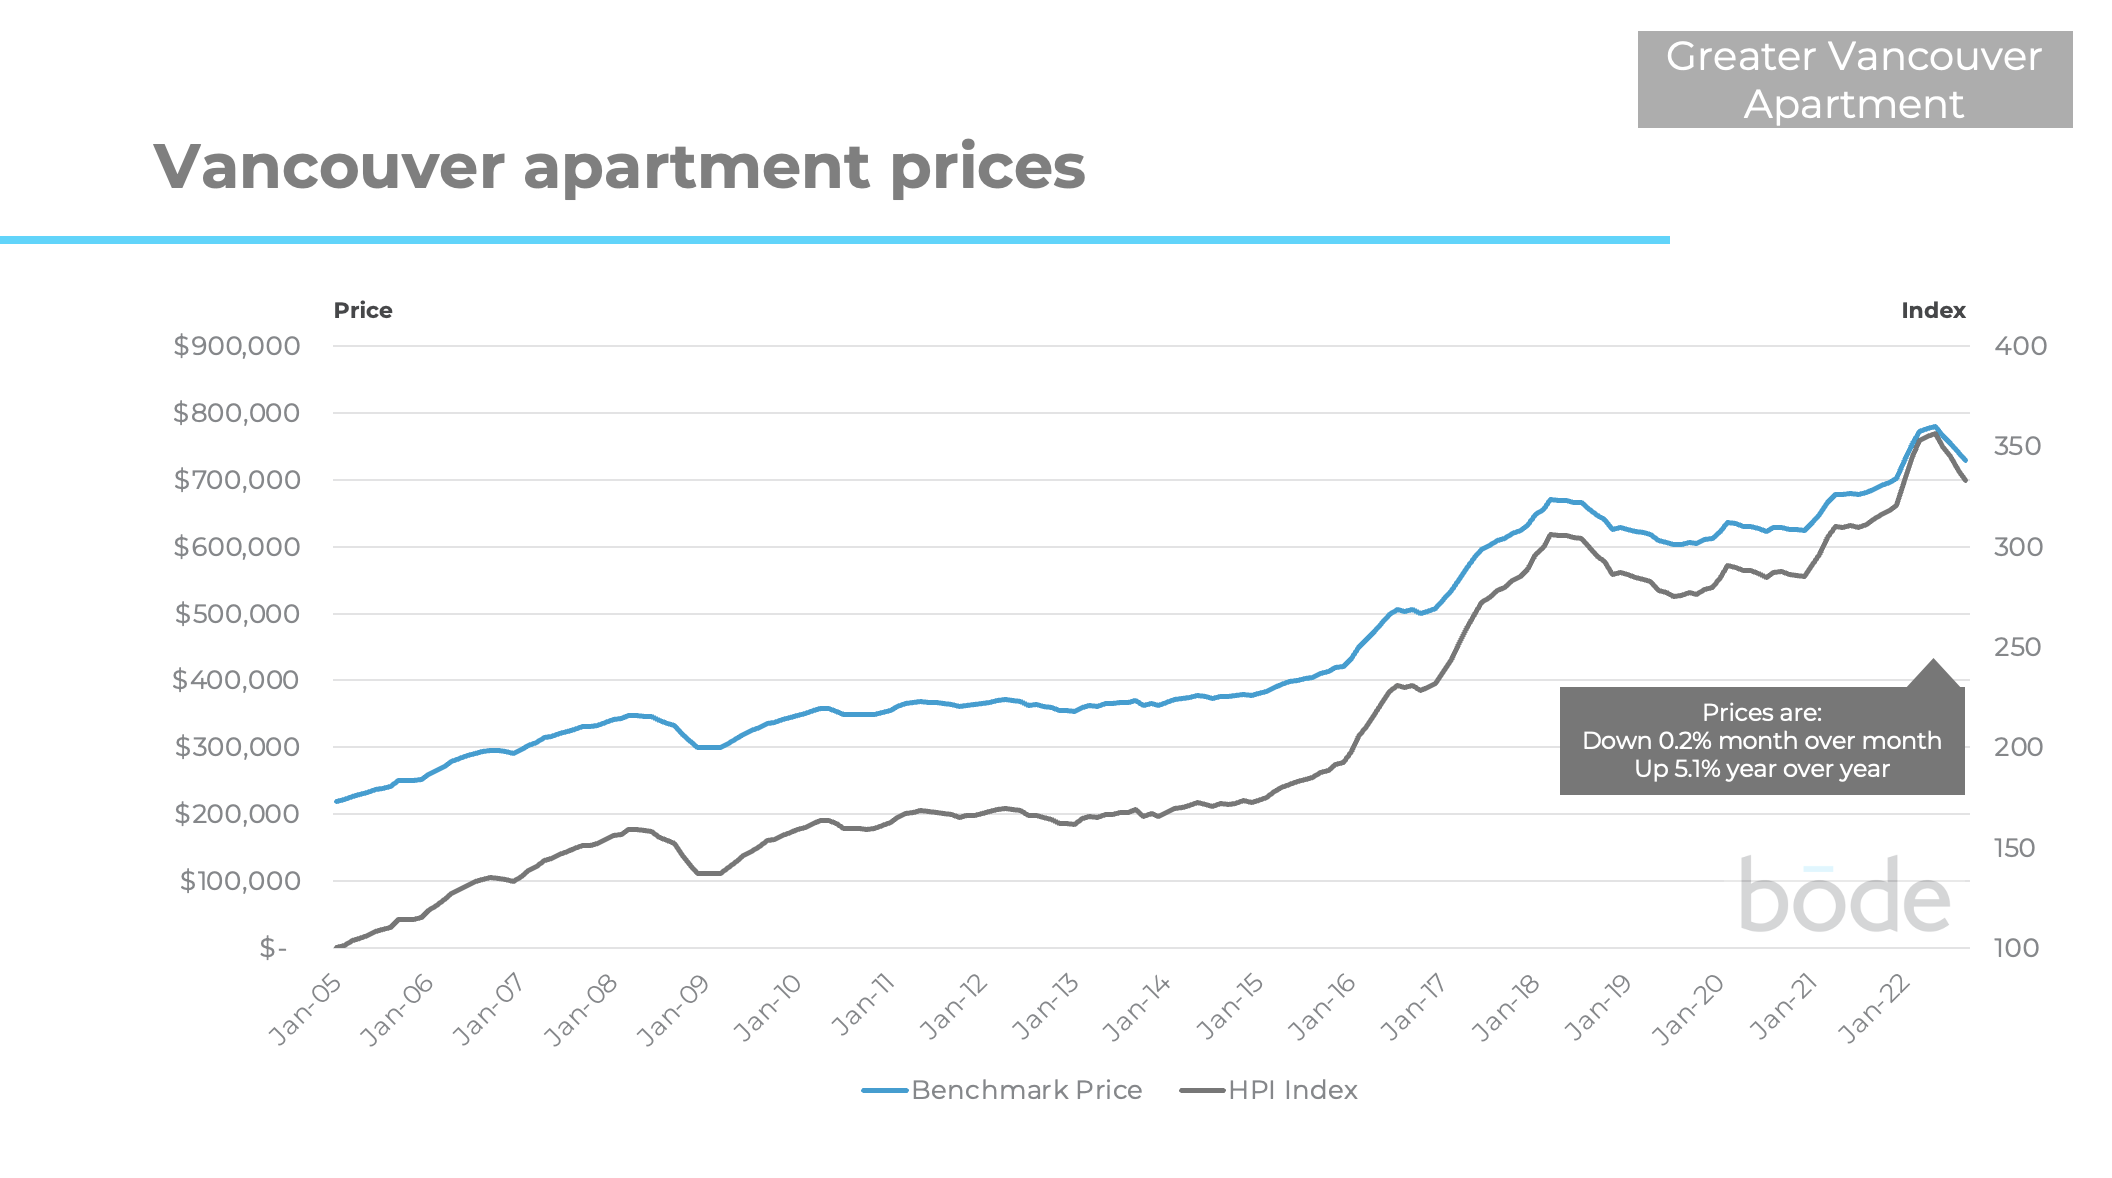 Vancouver apartment prices